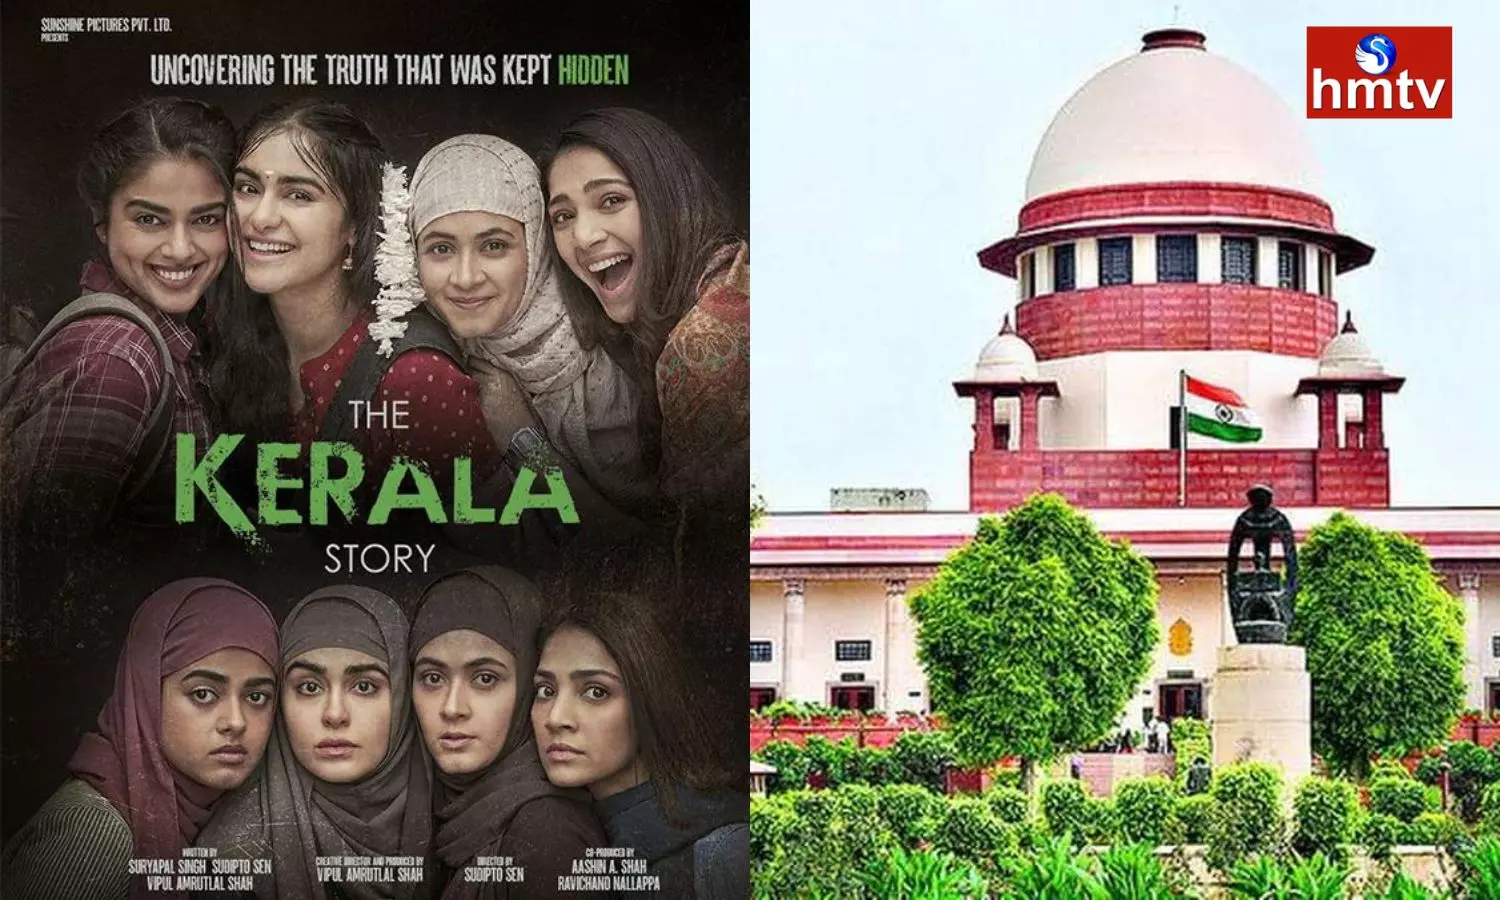 Kerala Story Film Crew Approached Supreme Court